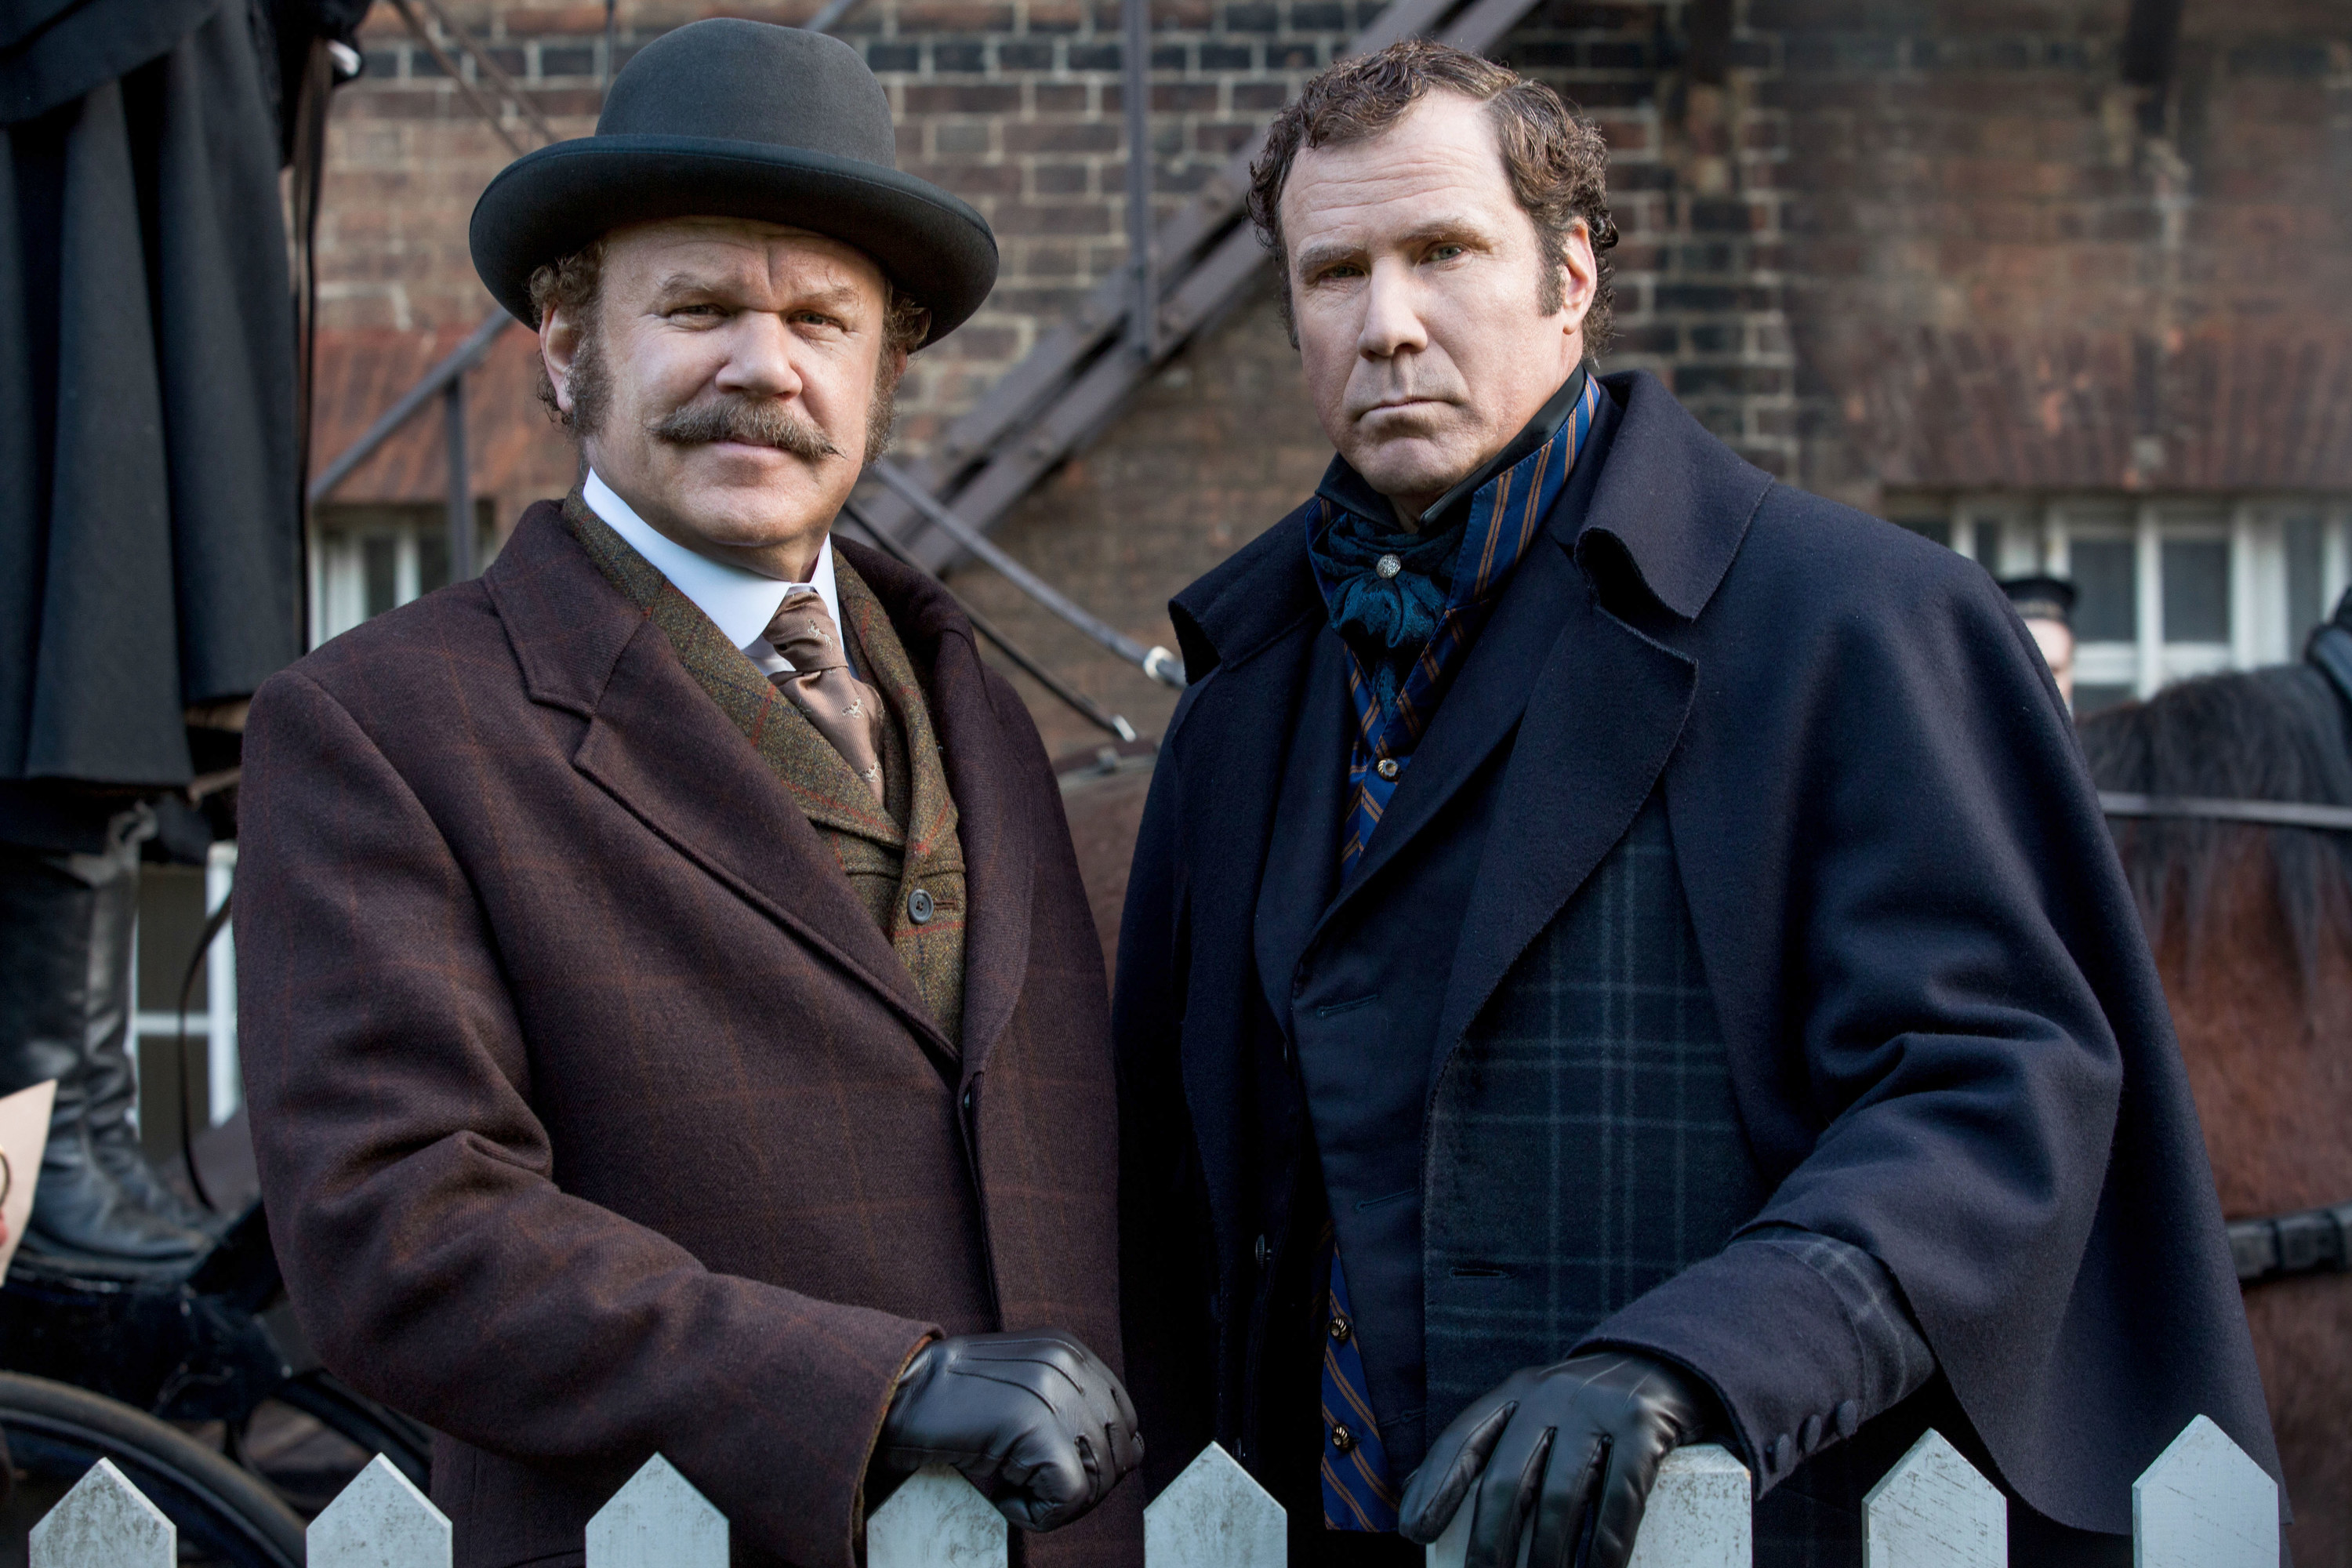 John C. Reilly and Will Ferrell lean on a fence